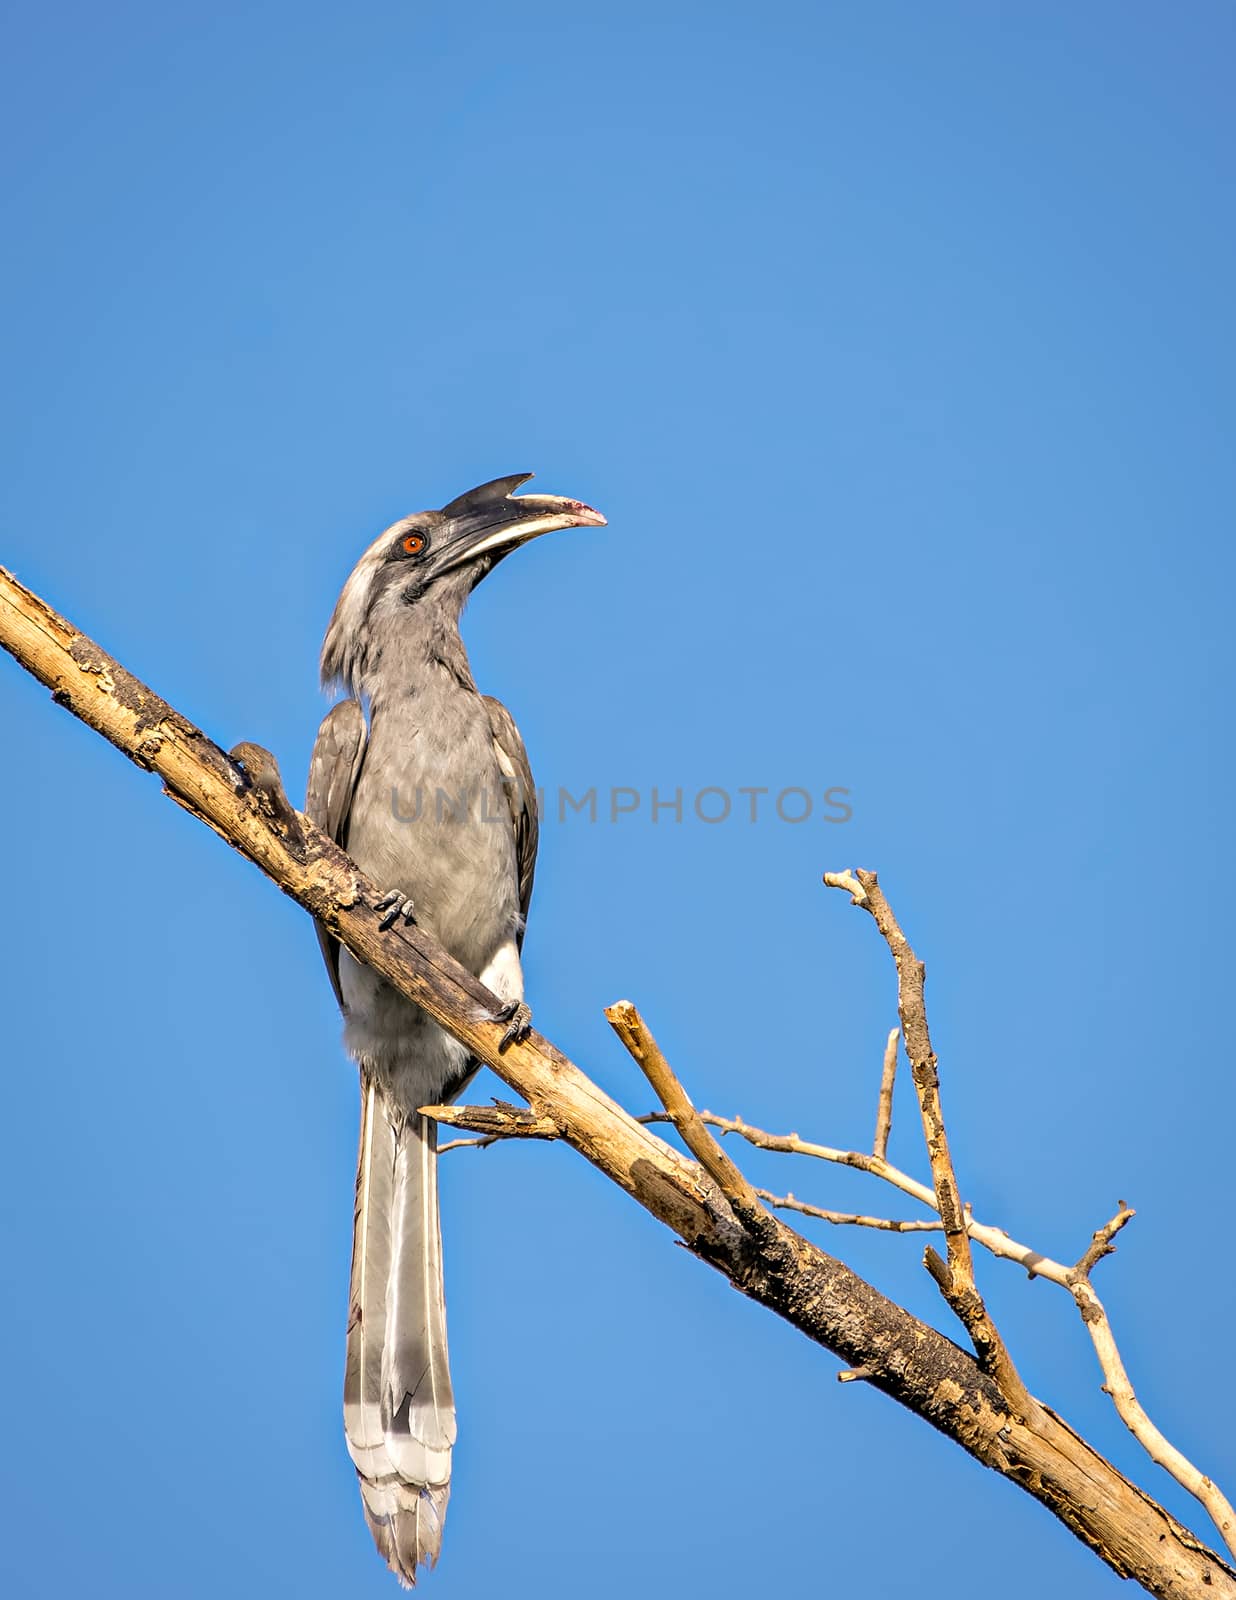 Close up image of Indian grey hornbill sitting on a dry tree branch with clear blue sky background.